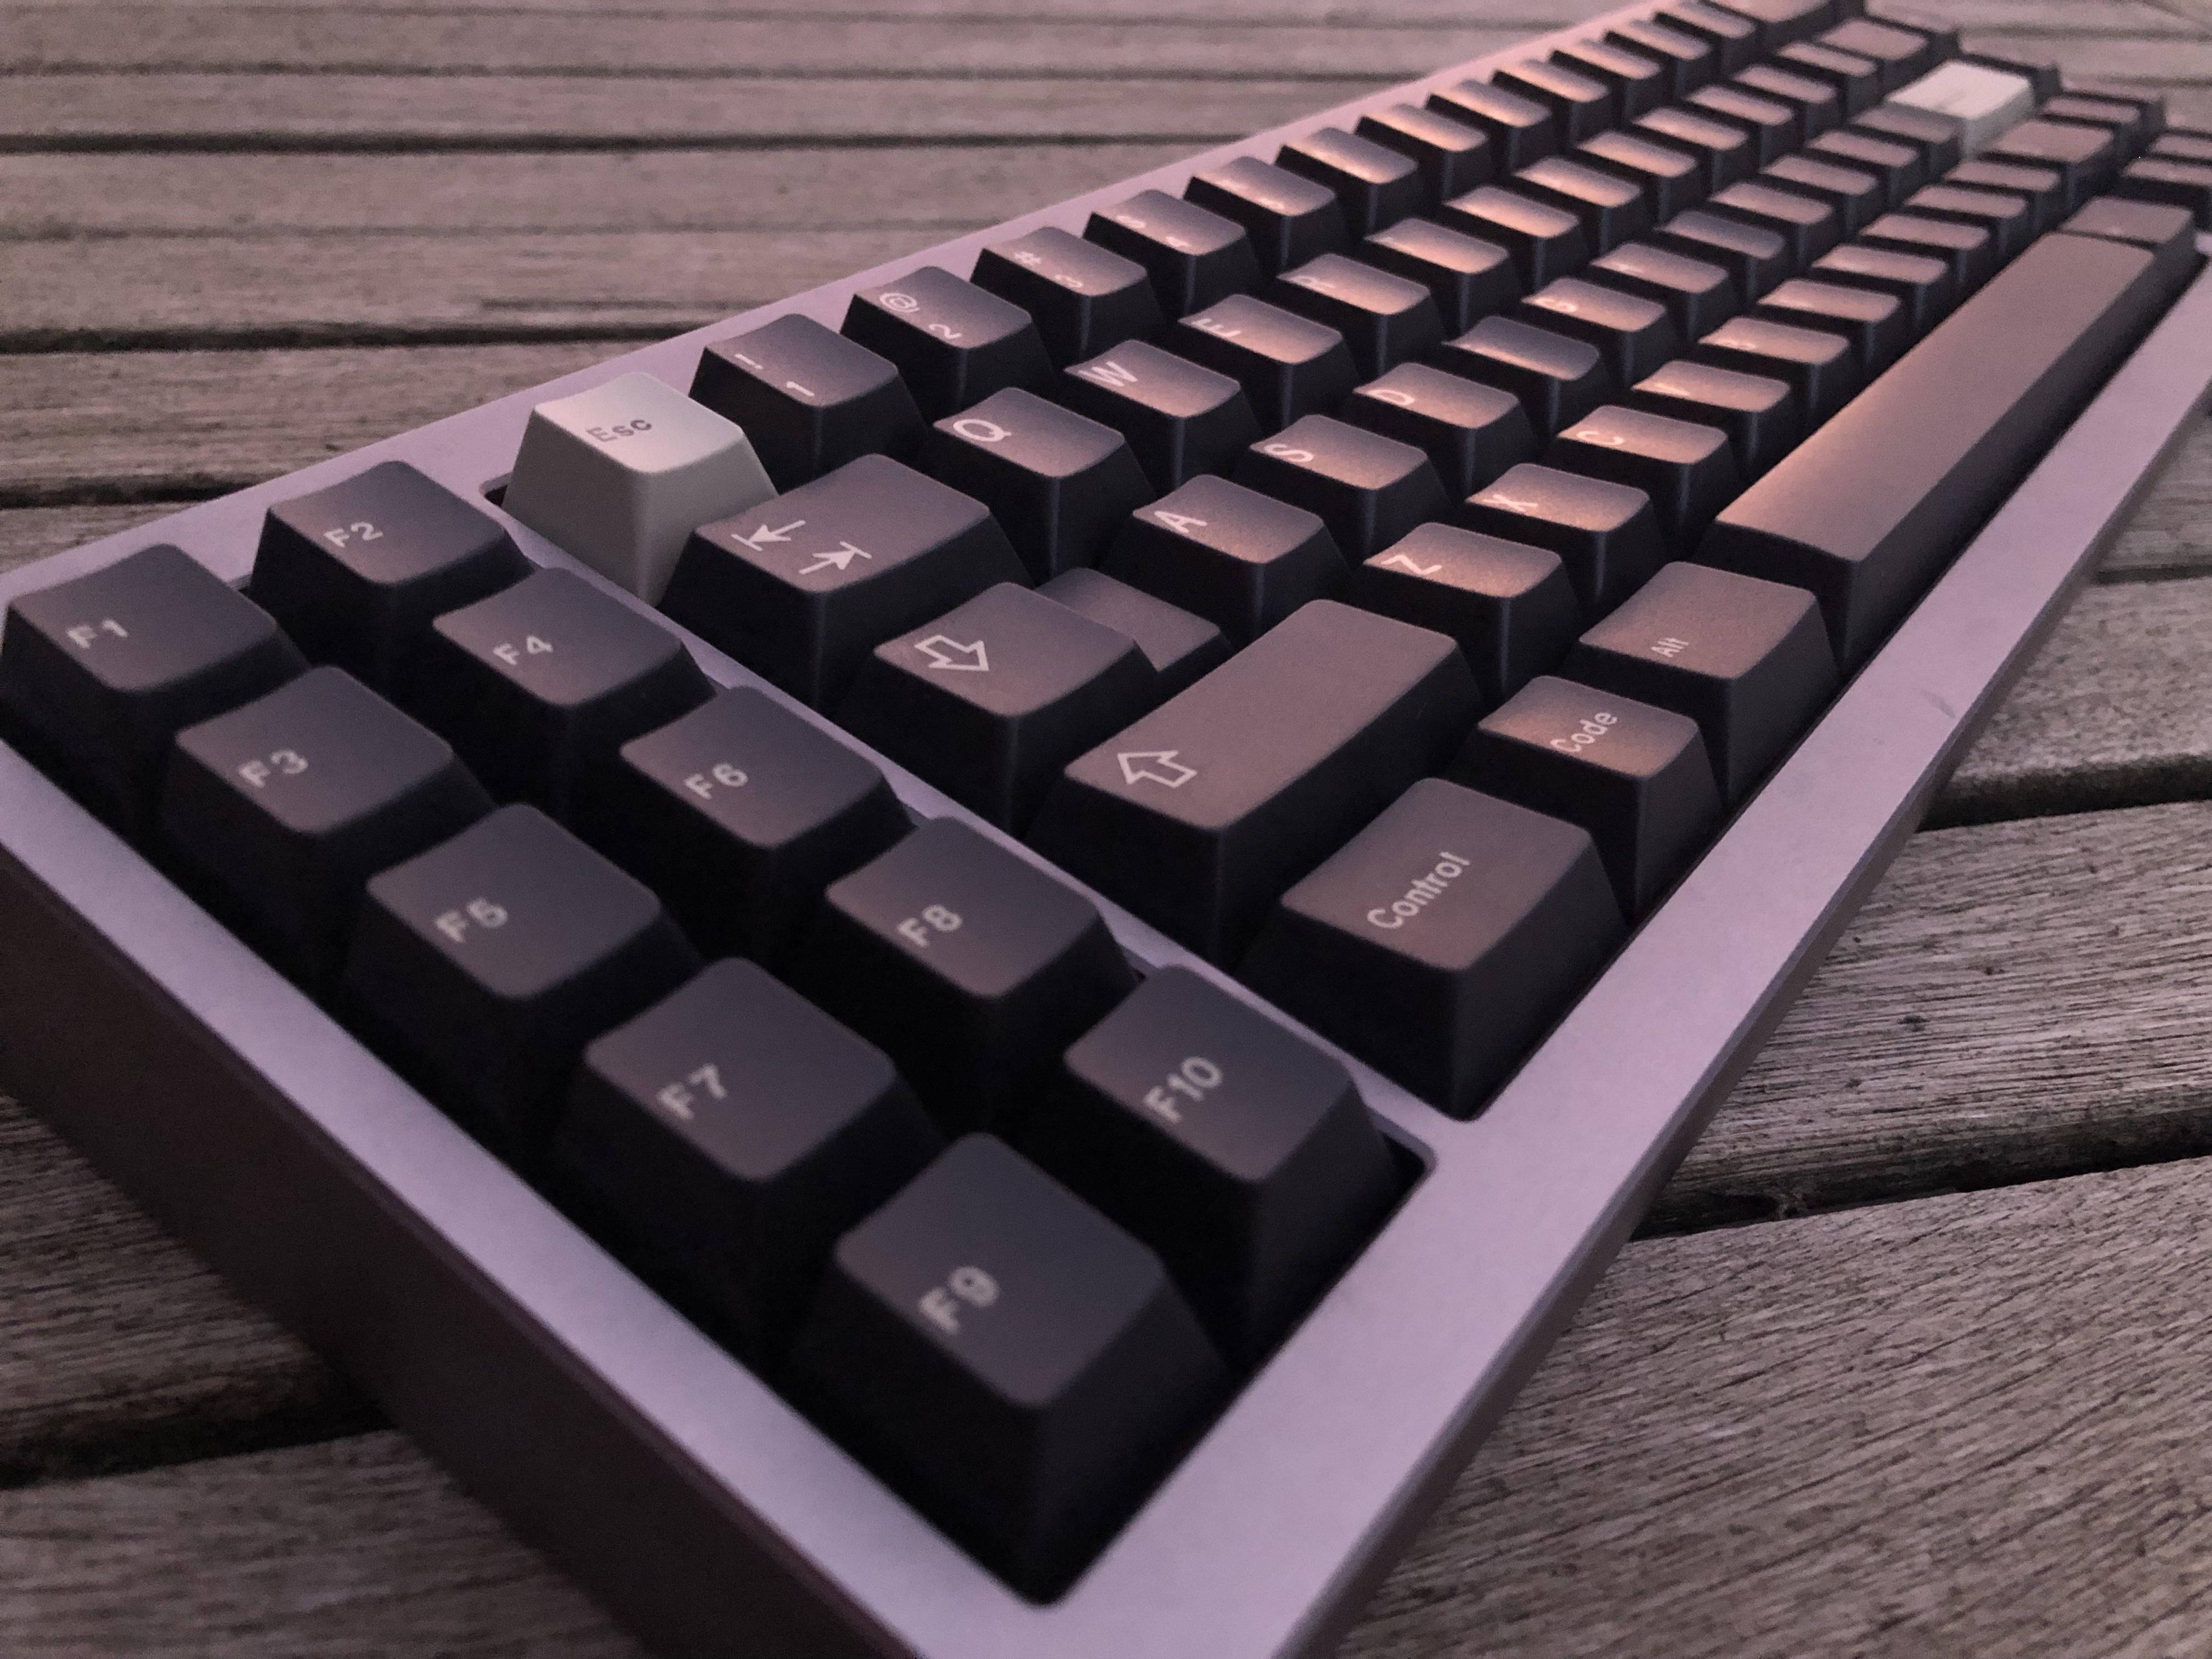 Post Your Keyboards! - Learning and discussion - KeebTalk